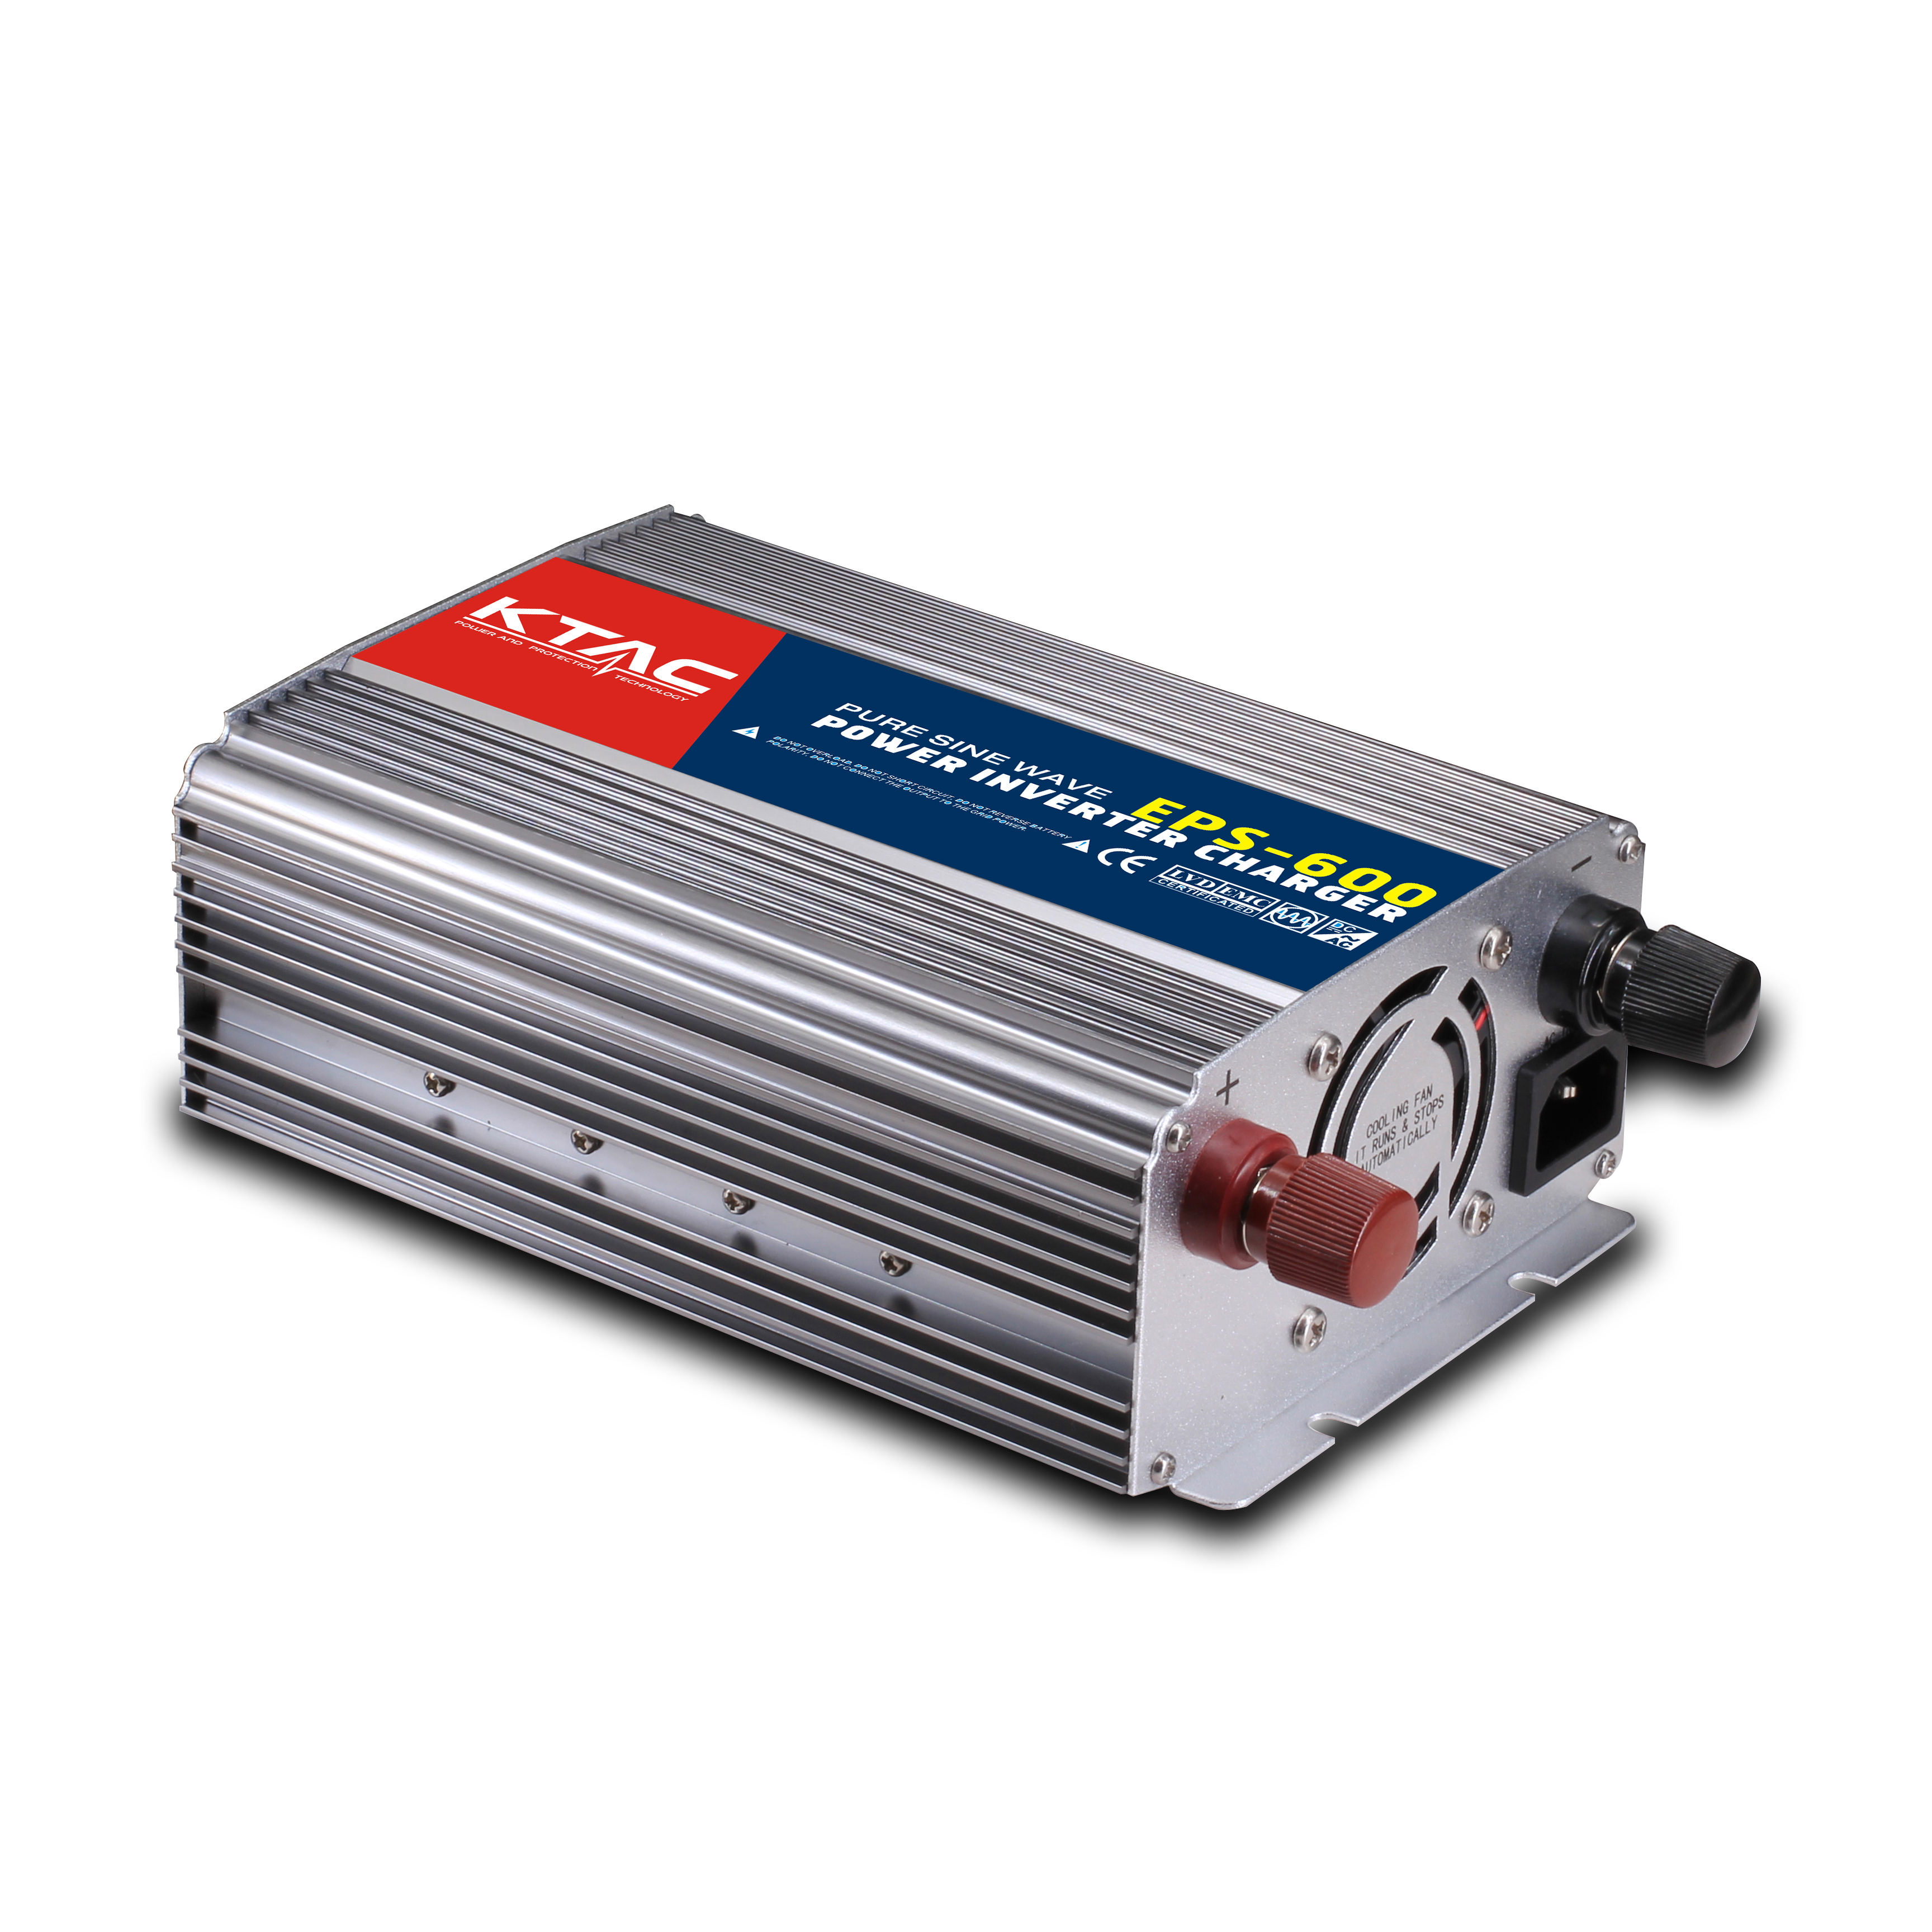 600W 12V high frequency type pure sine wave inverter charger EPS with UPS function